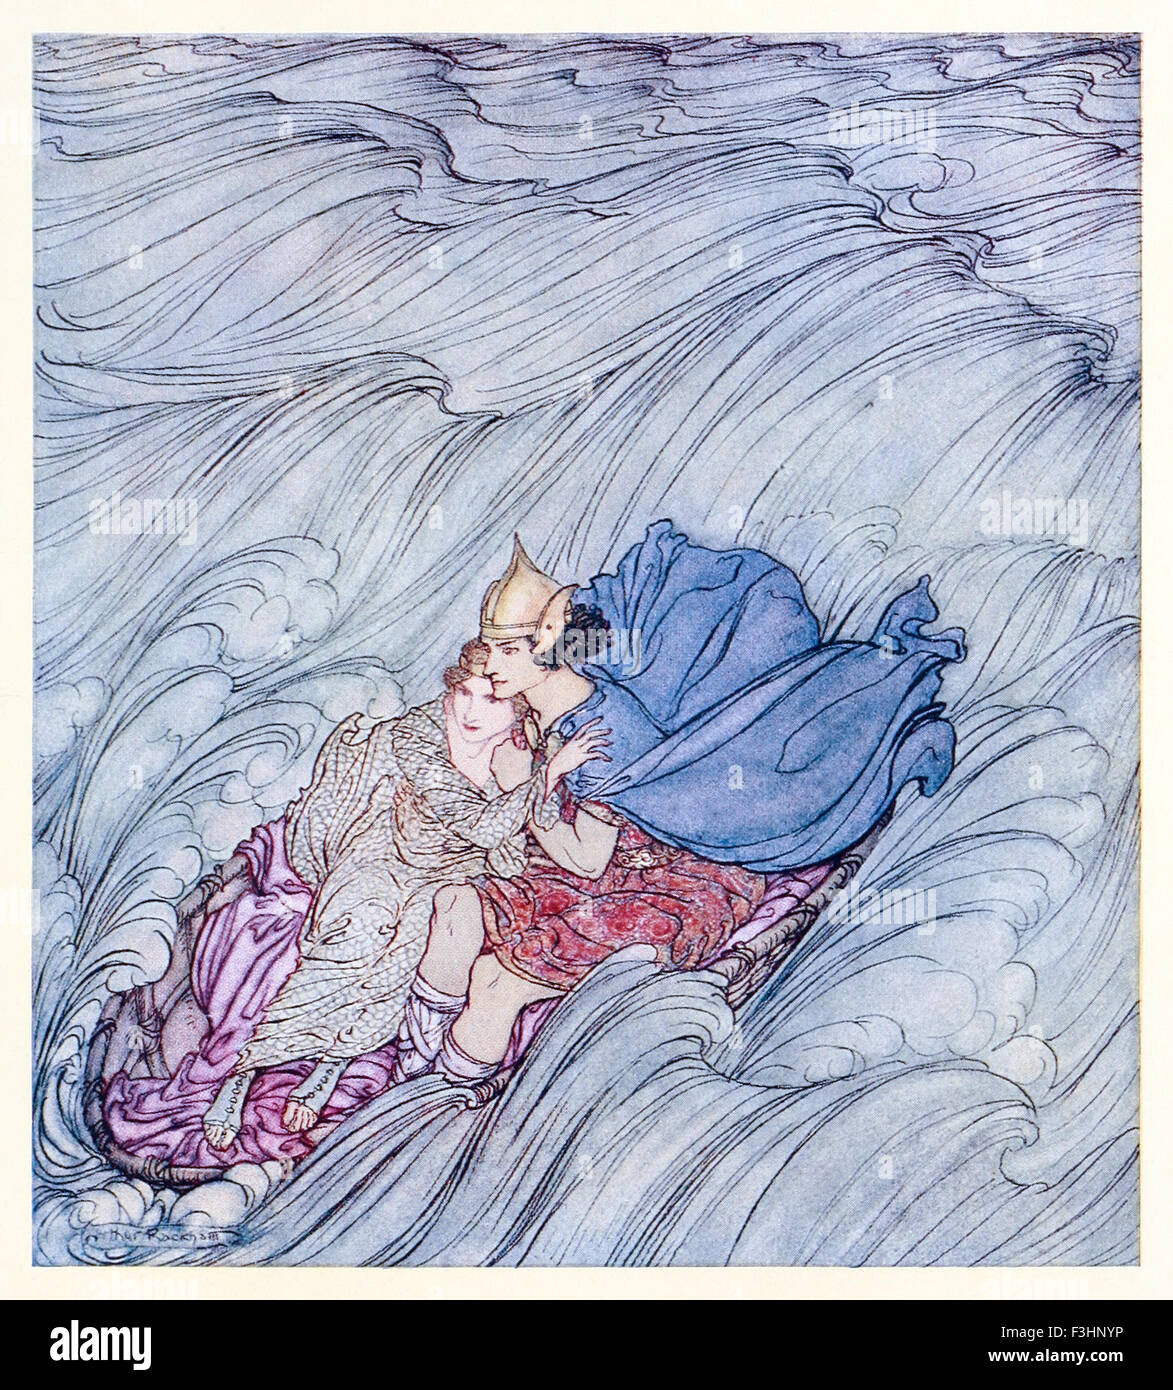 'The waves of all the worlds seemed to whirl past them in one huge green carpet' from 'Becuma of the White Skin' in 'Irish Fairy Tales', illustration by Arthur Rackham (1867-1939). See description for more information. Stock Photo